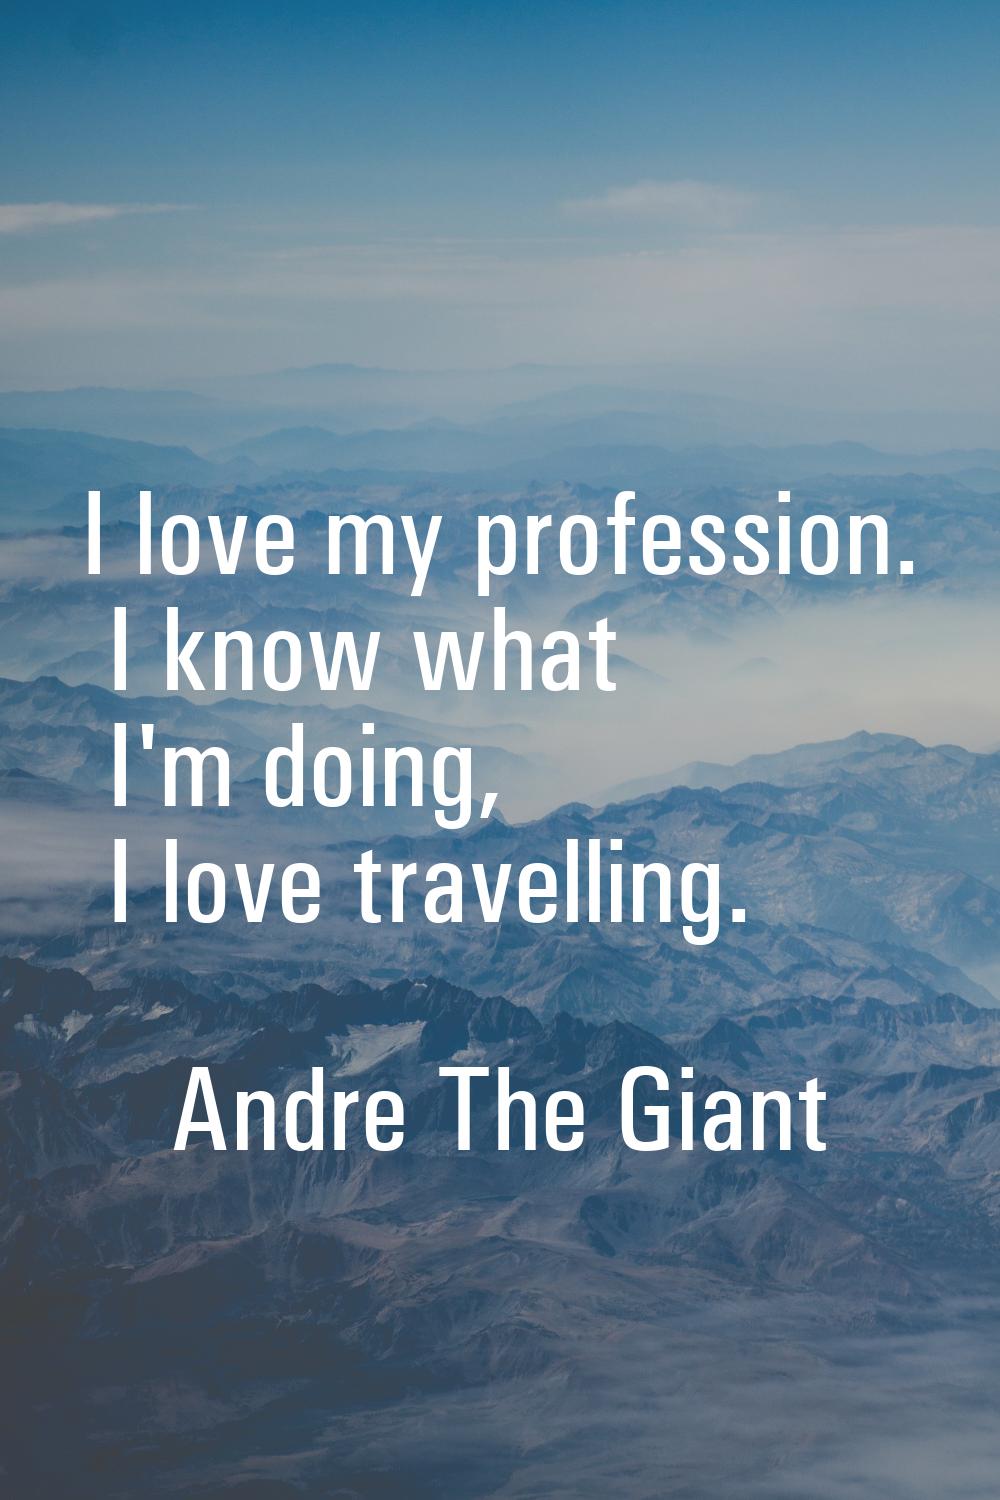 I love my profession. I know what I'm doing, I love travelling.